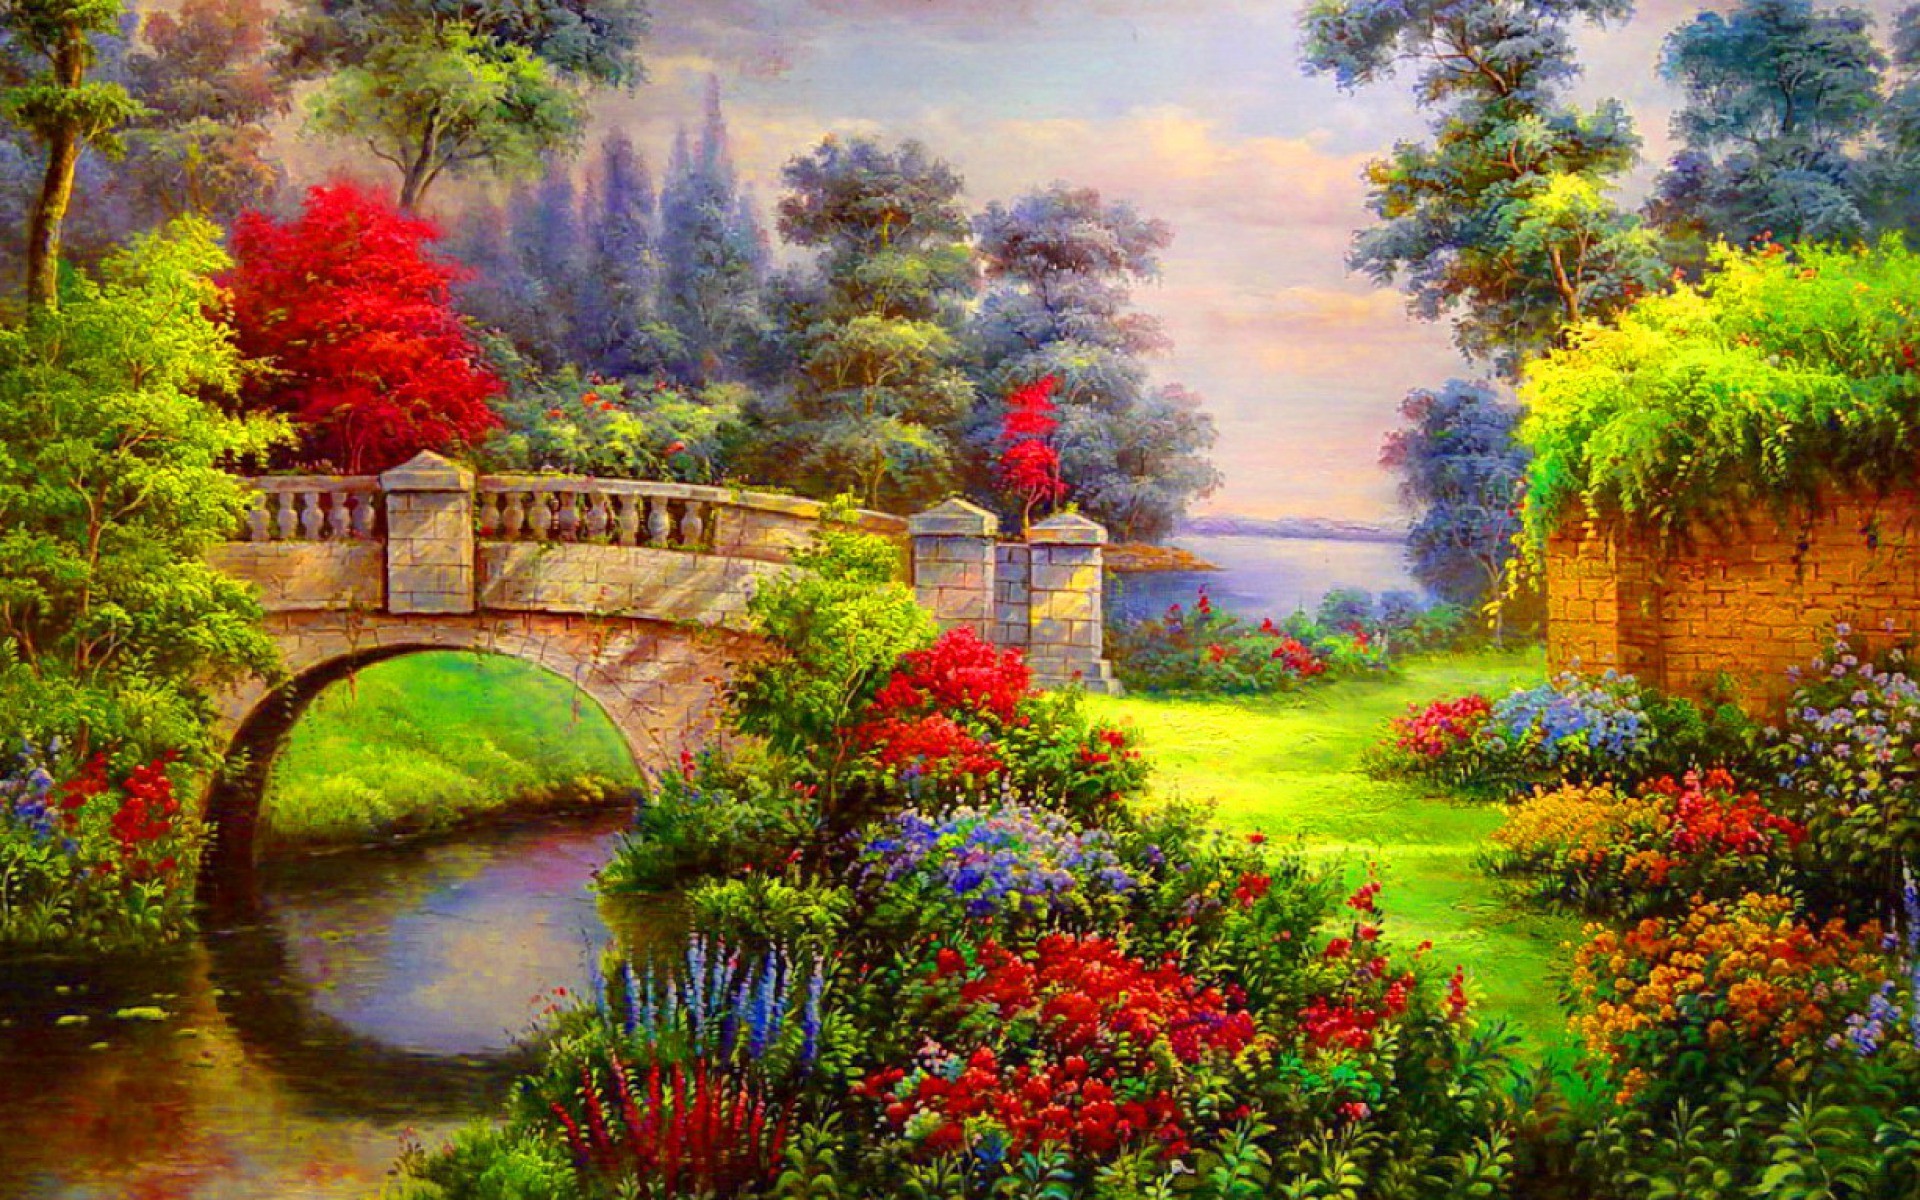 1920x1200 Vibrant Flowers Bridge River wallpapers and stock photos